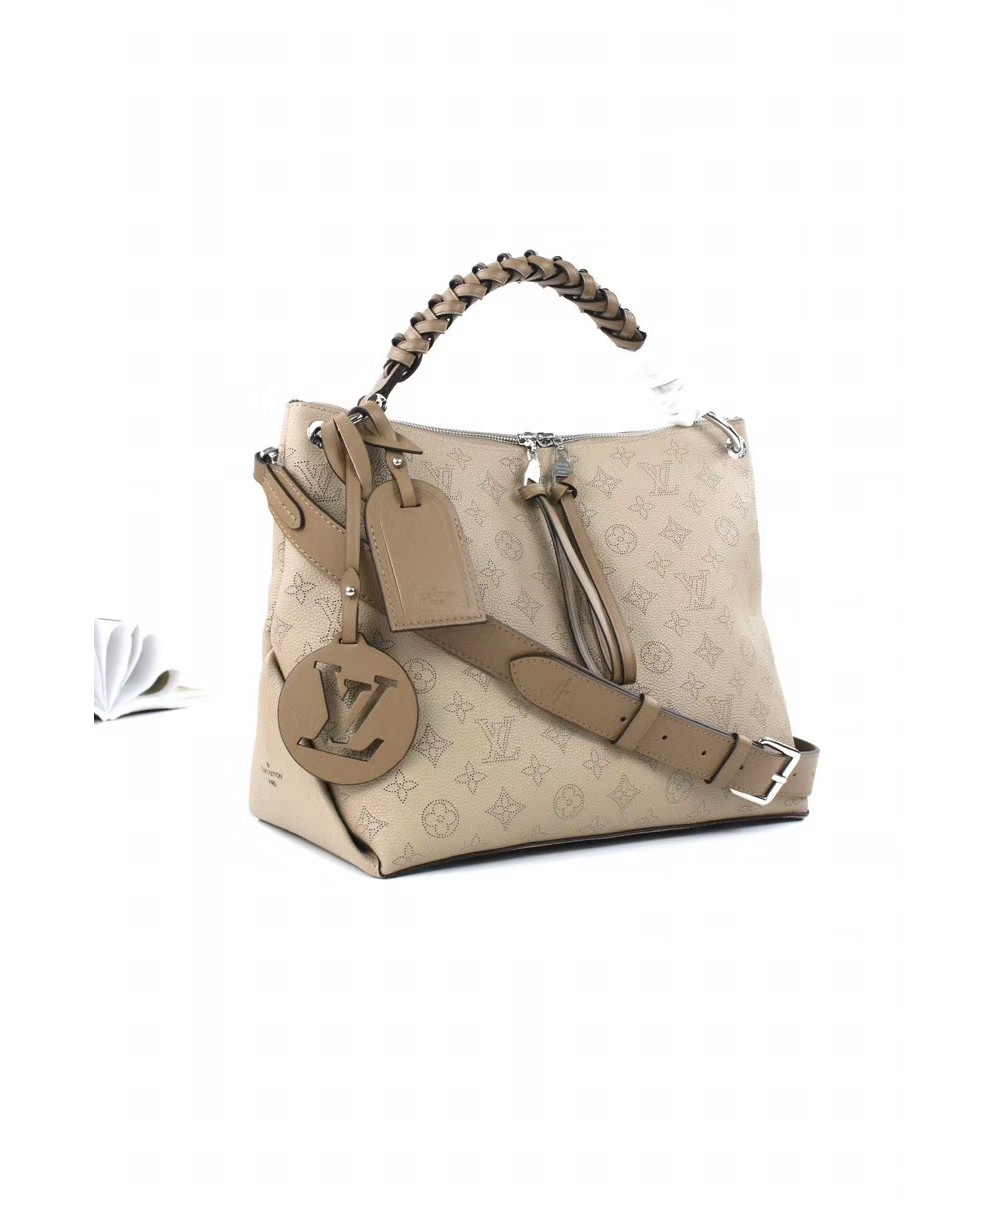 LV Beaubourg Braided Leather Hobo Top Handle